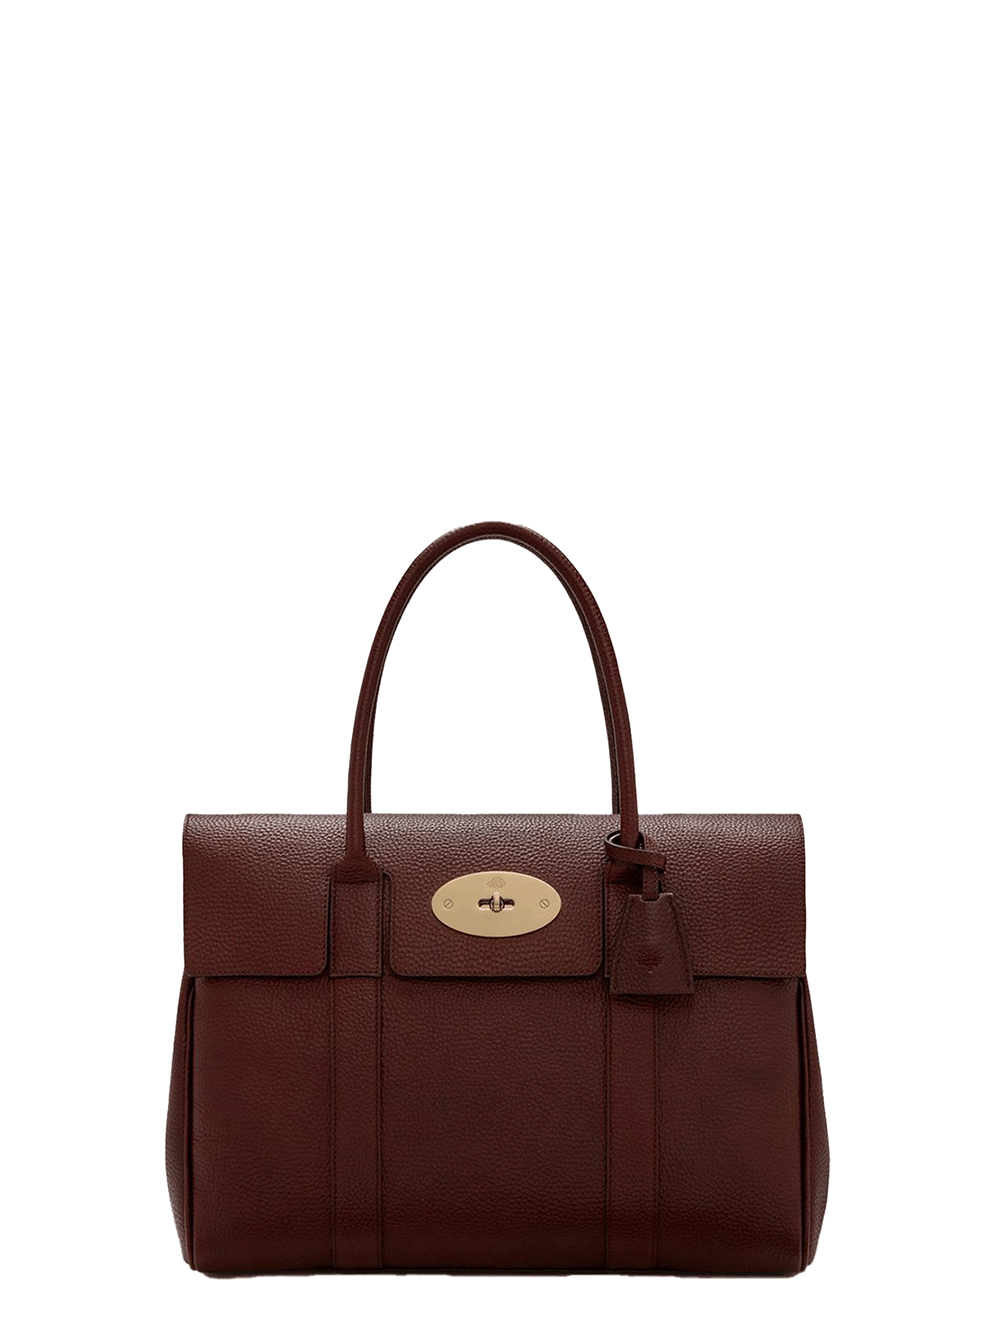 Mulberry-Bayswater-Small-Classic-Grain-Oxblood-1